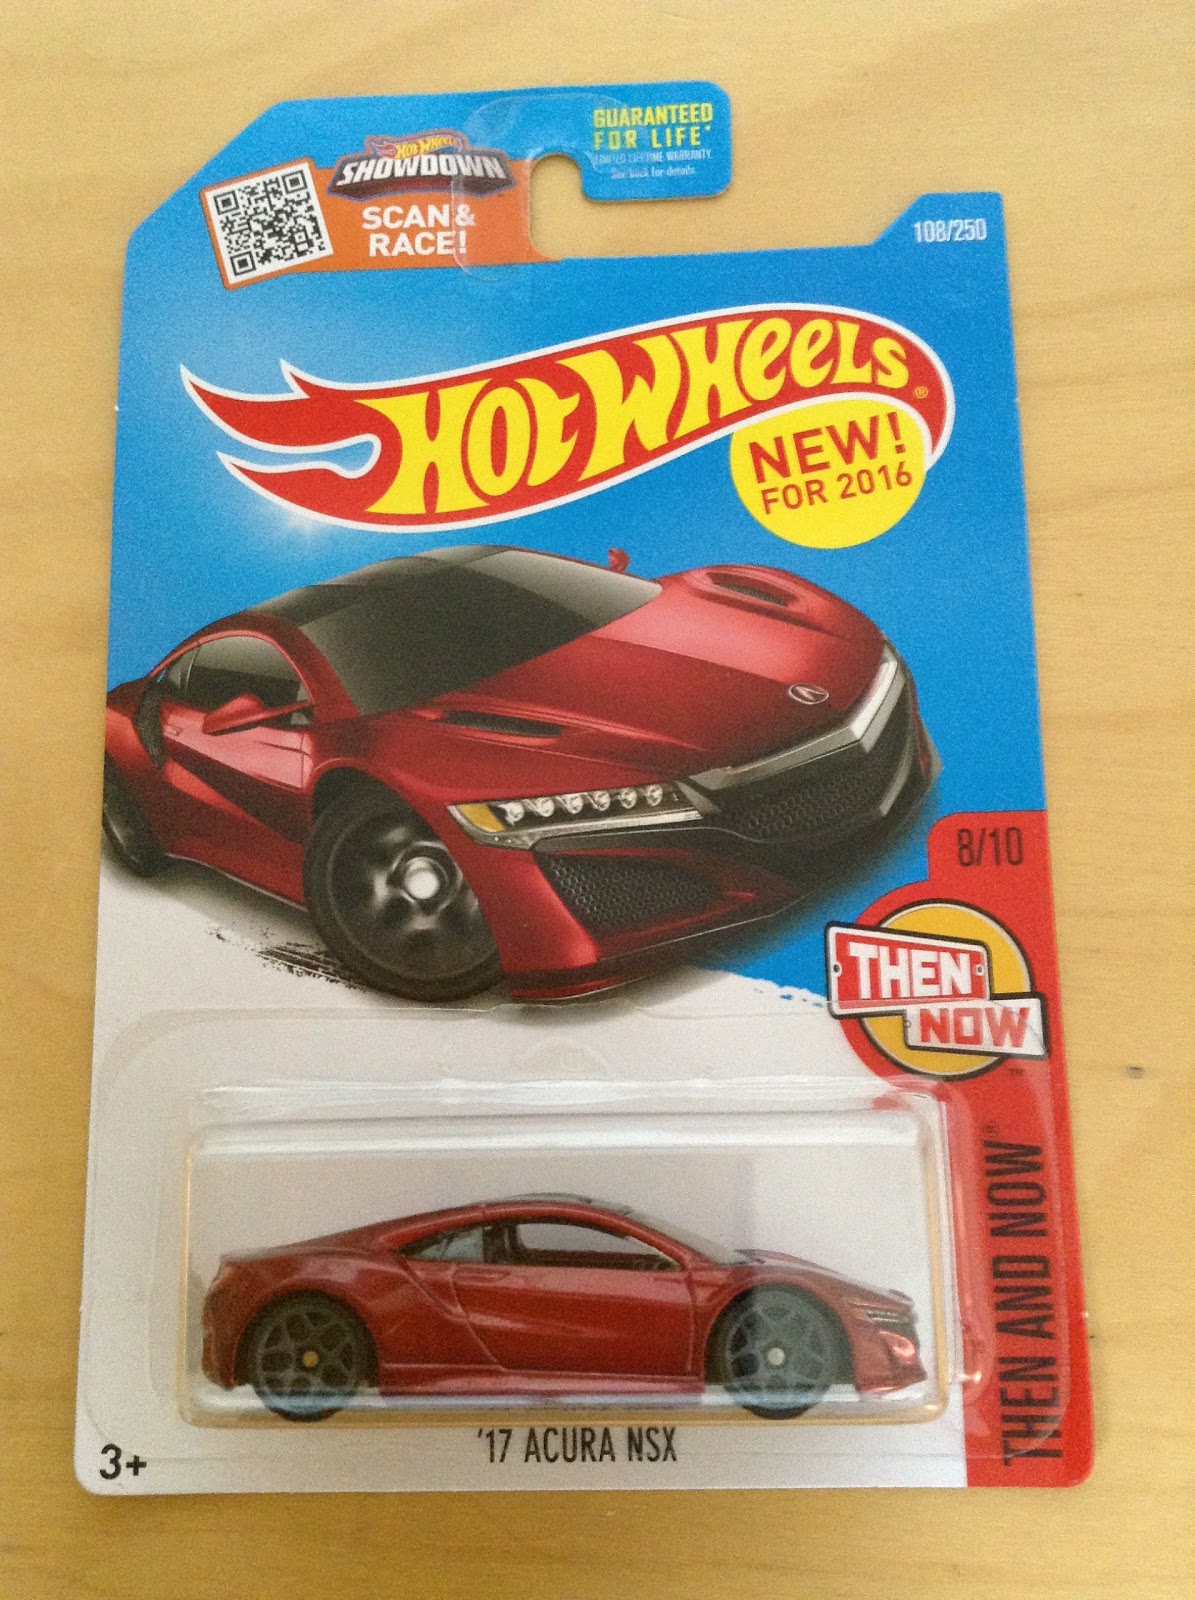 HOT WHEELS /'17 Acura NSX Red HW Then And Now 8//10